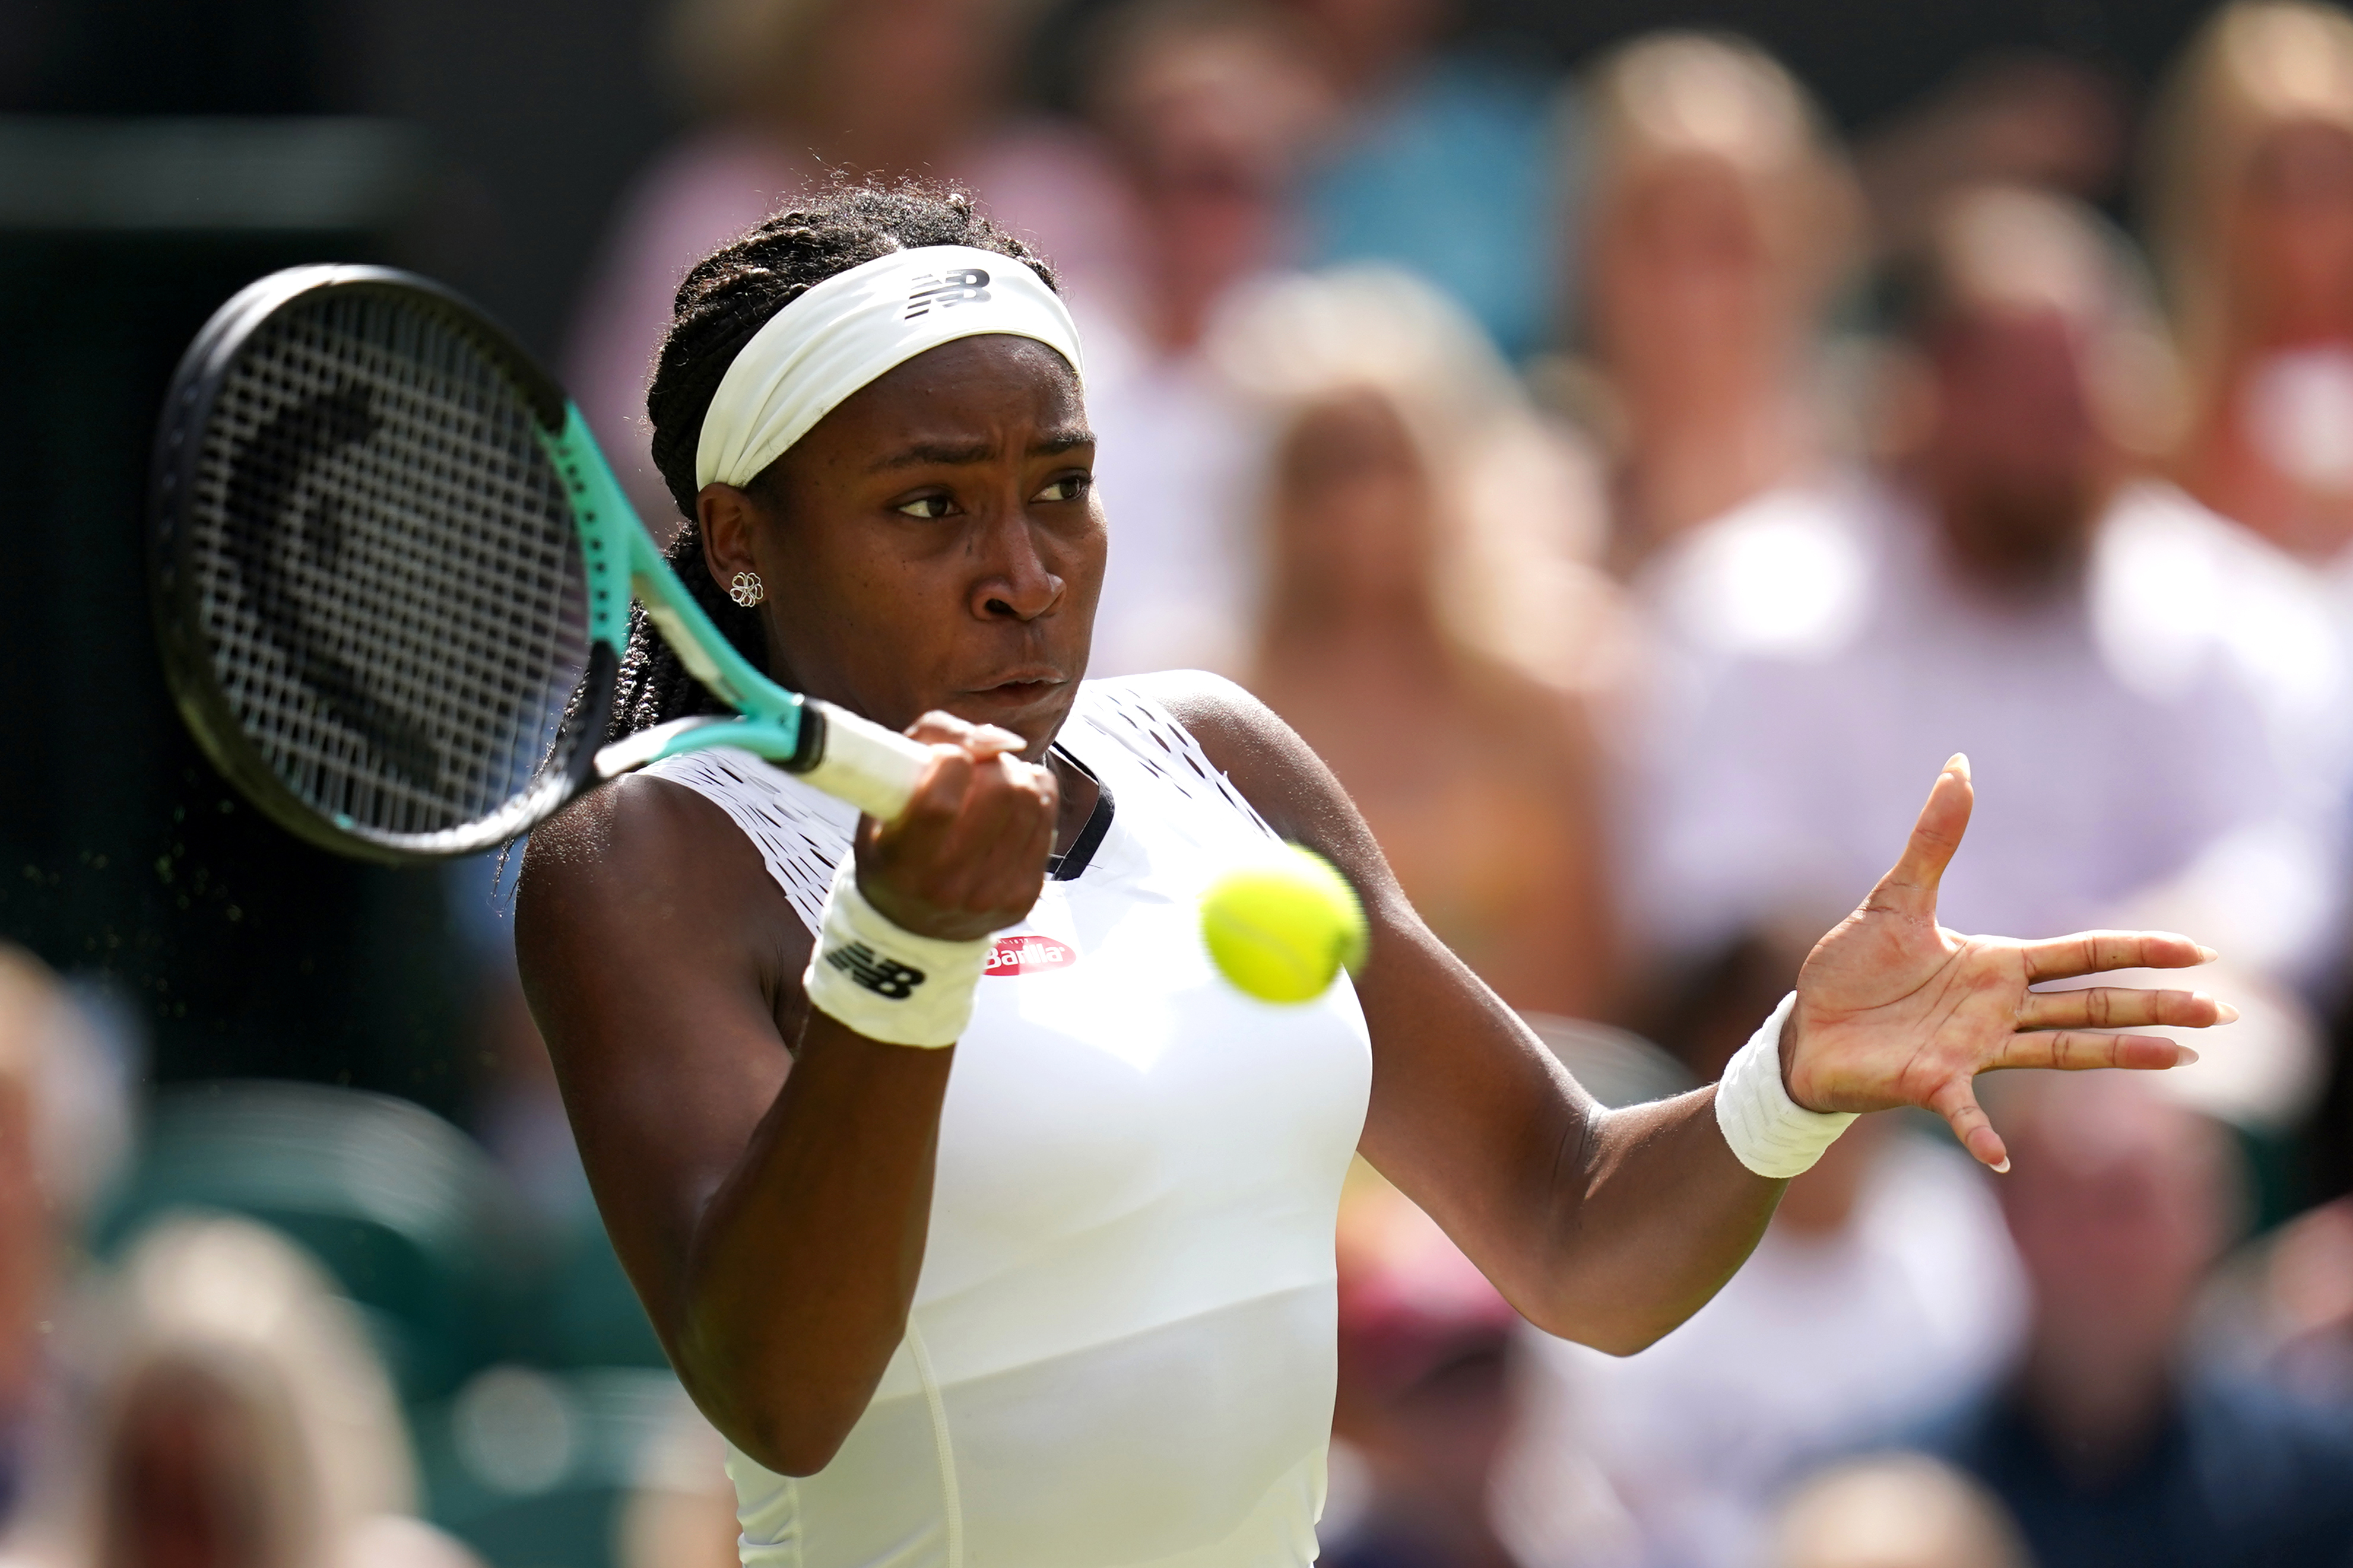 Coco Gauff's forehand has been questioned